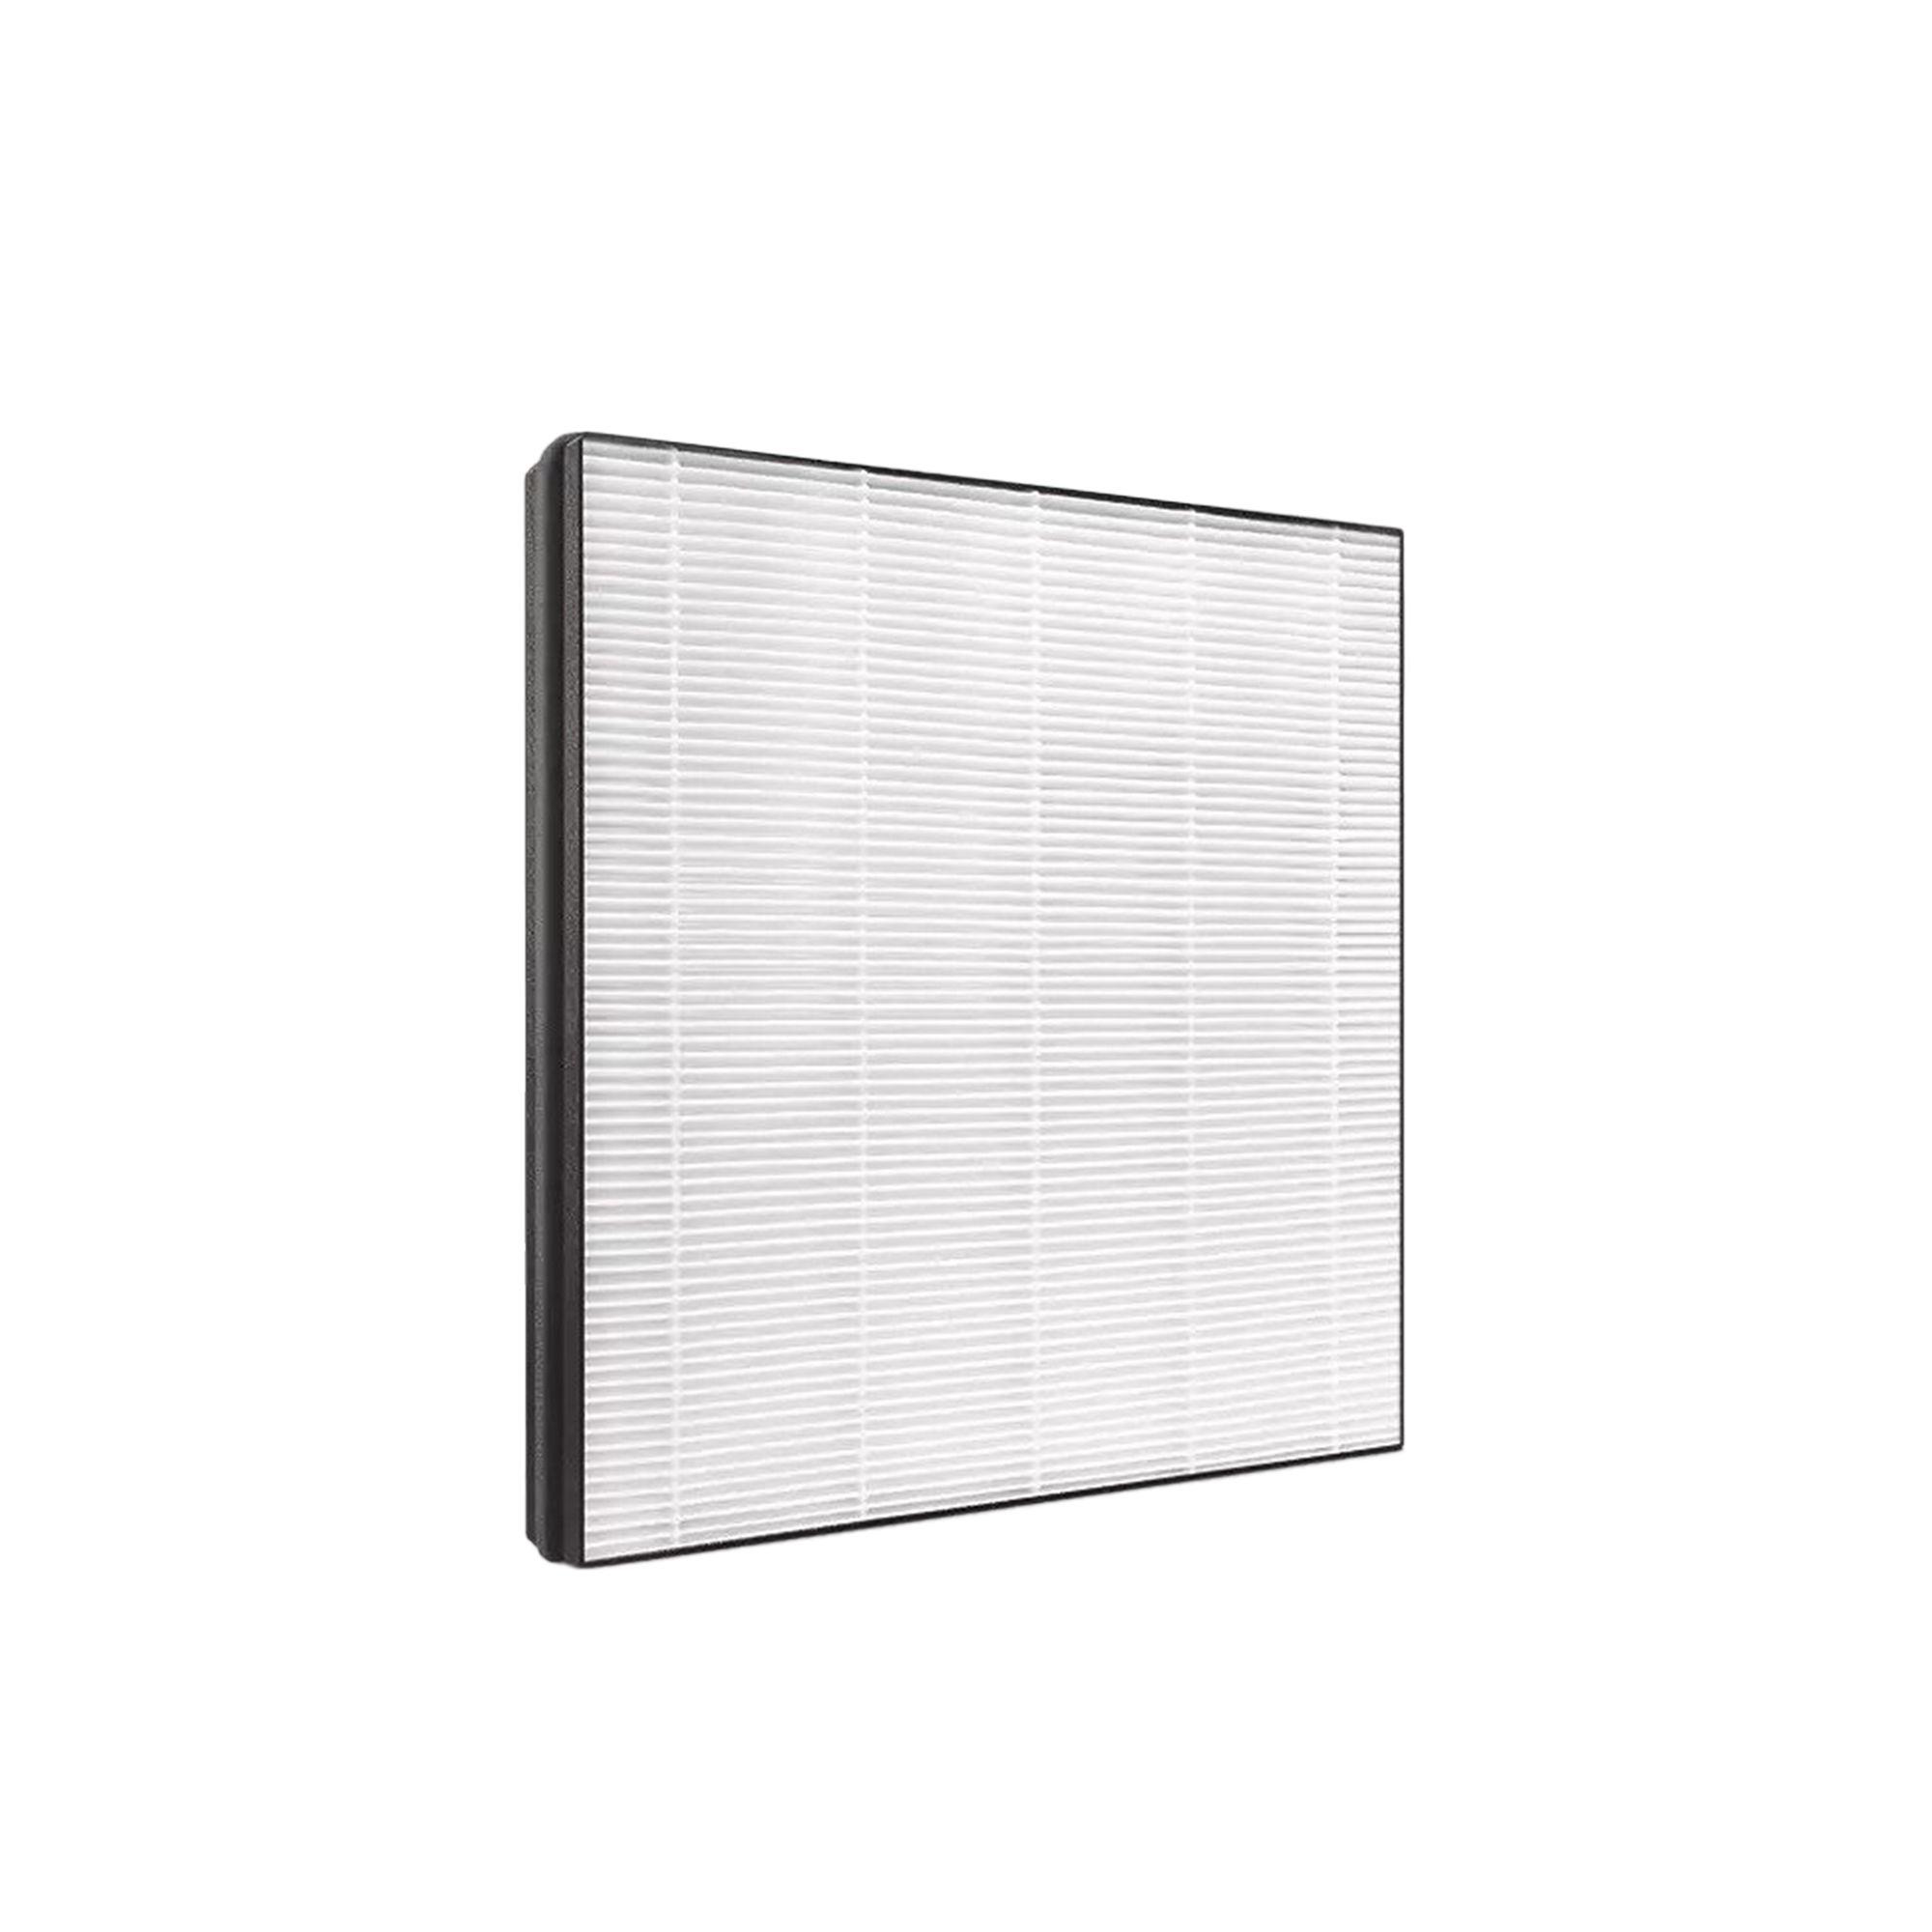 Philips 2 in 1 NanoProtect 5000 Series HEPA Filter Replacement for DE5205 Image 1